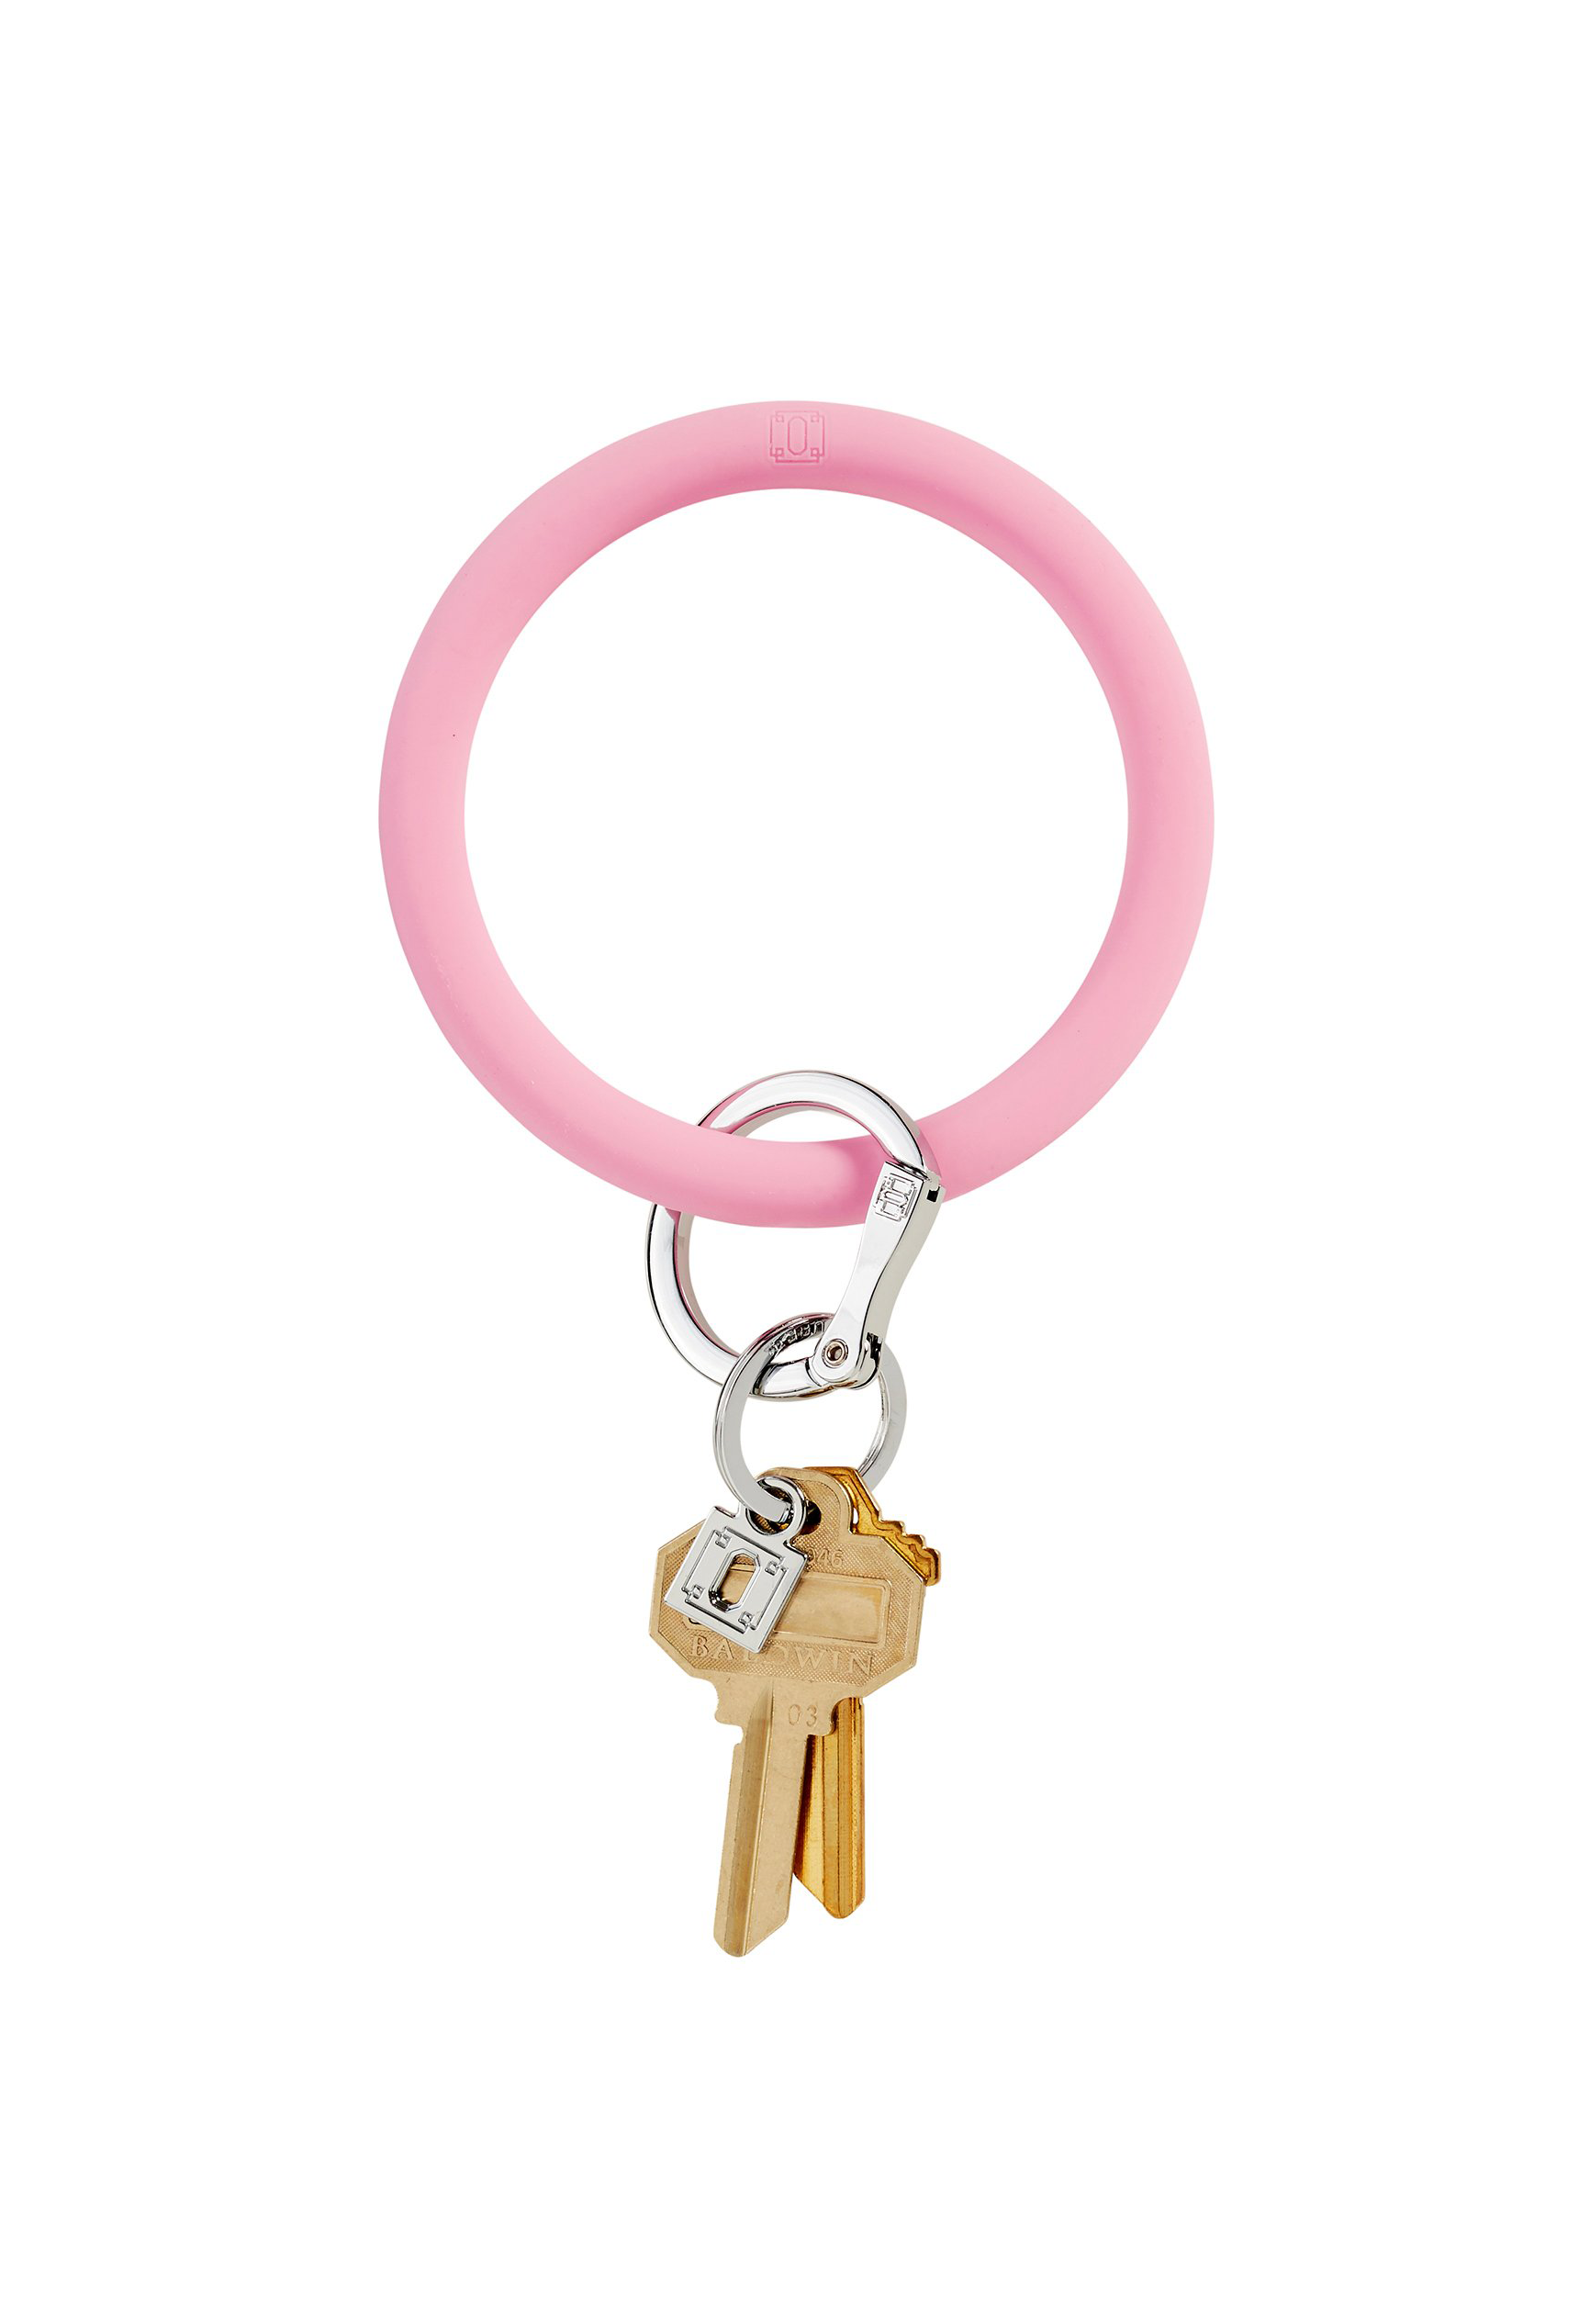 O-Venture Silicone Key Ring in Cotton Candy Pink